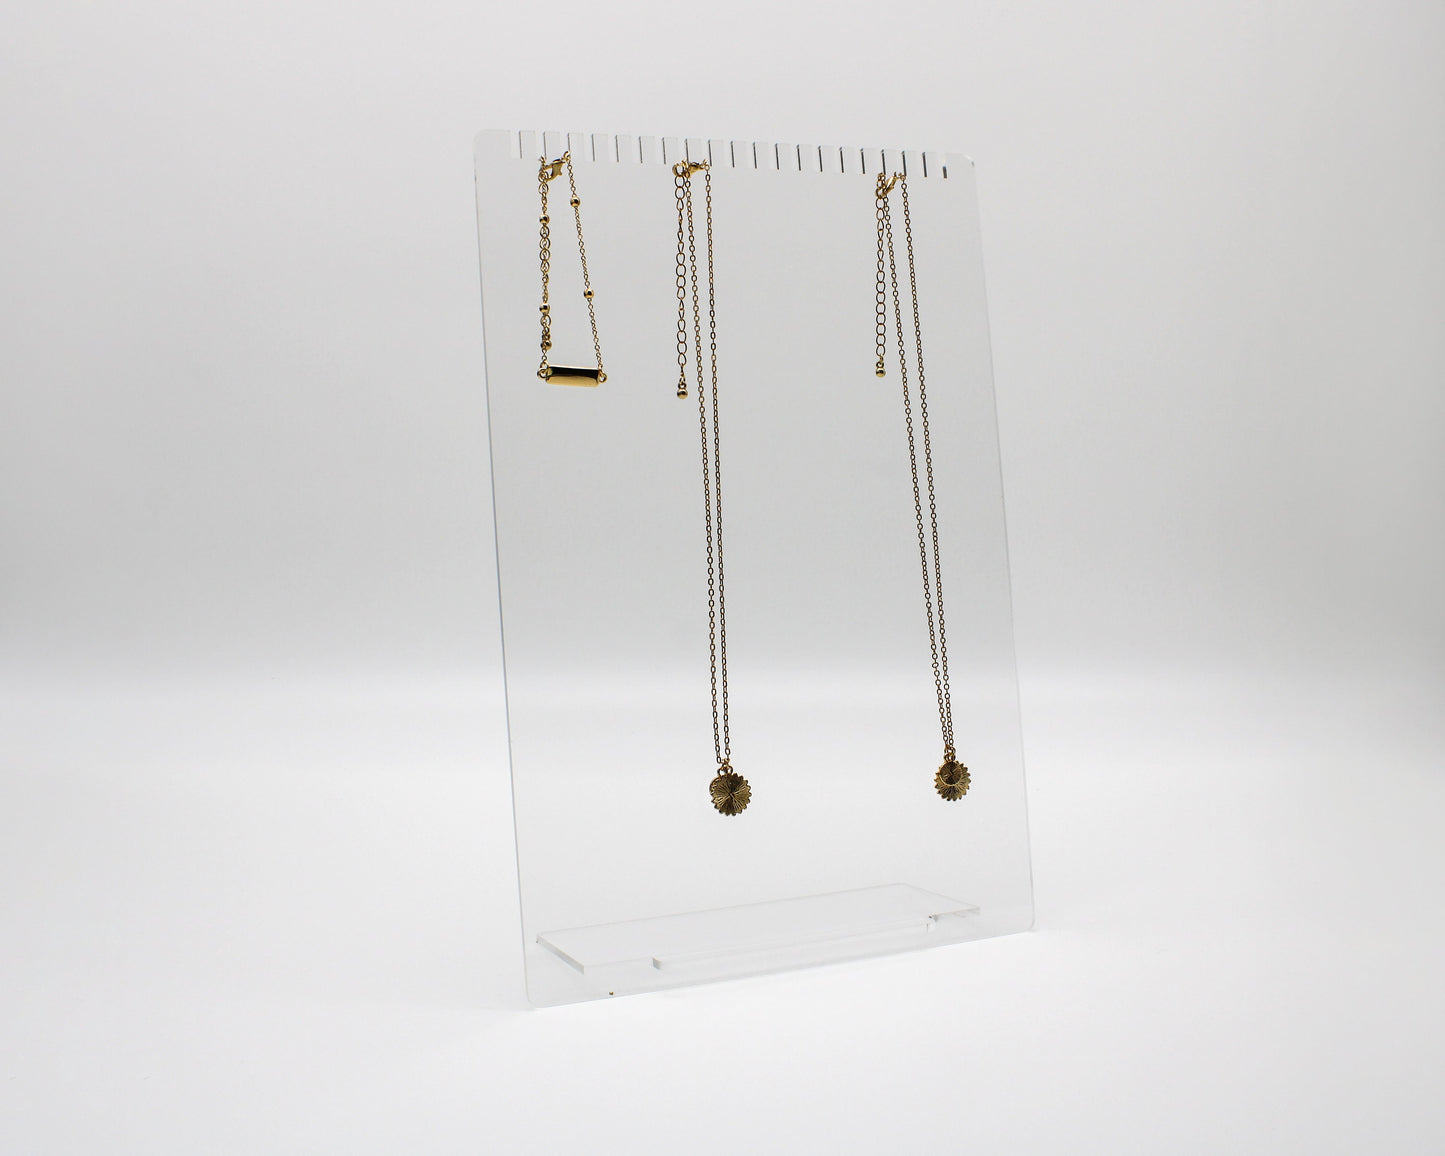 Clear Acrylic Necklace Holder - Modern Jewellery Display Stand - Bracelet Organiser